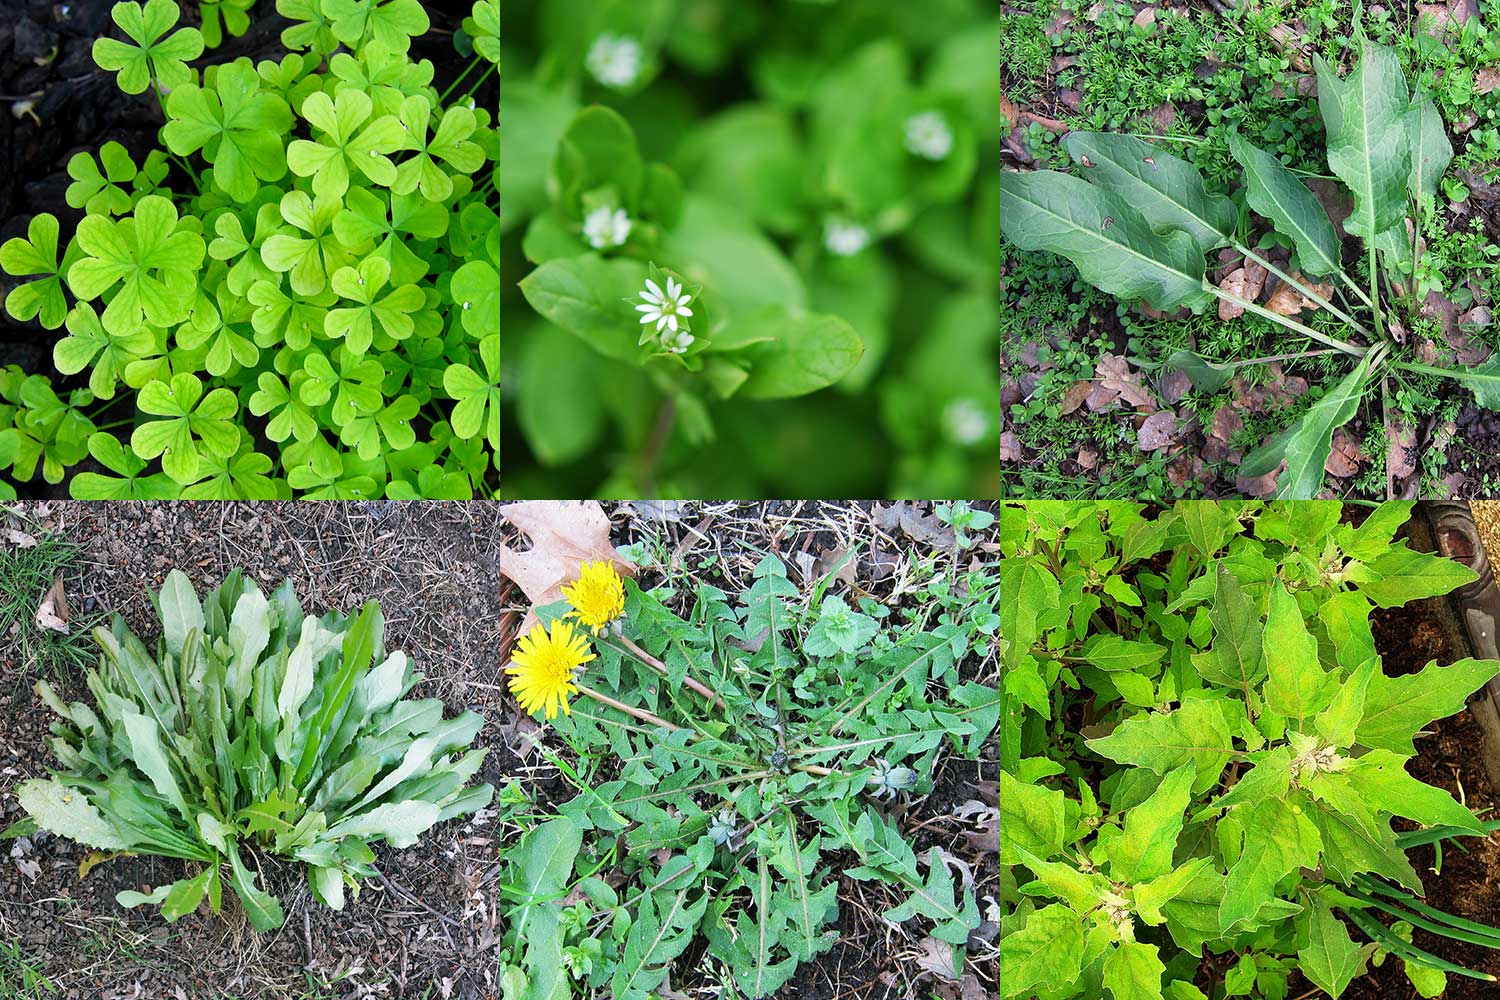 edible weeds in your yard - eating lawn weeds | hank shaw